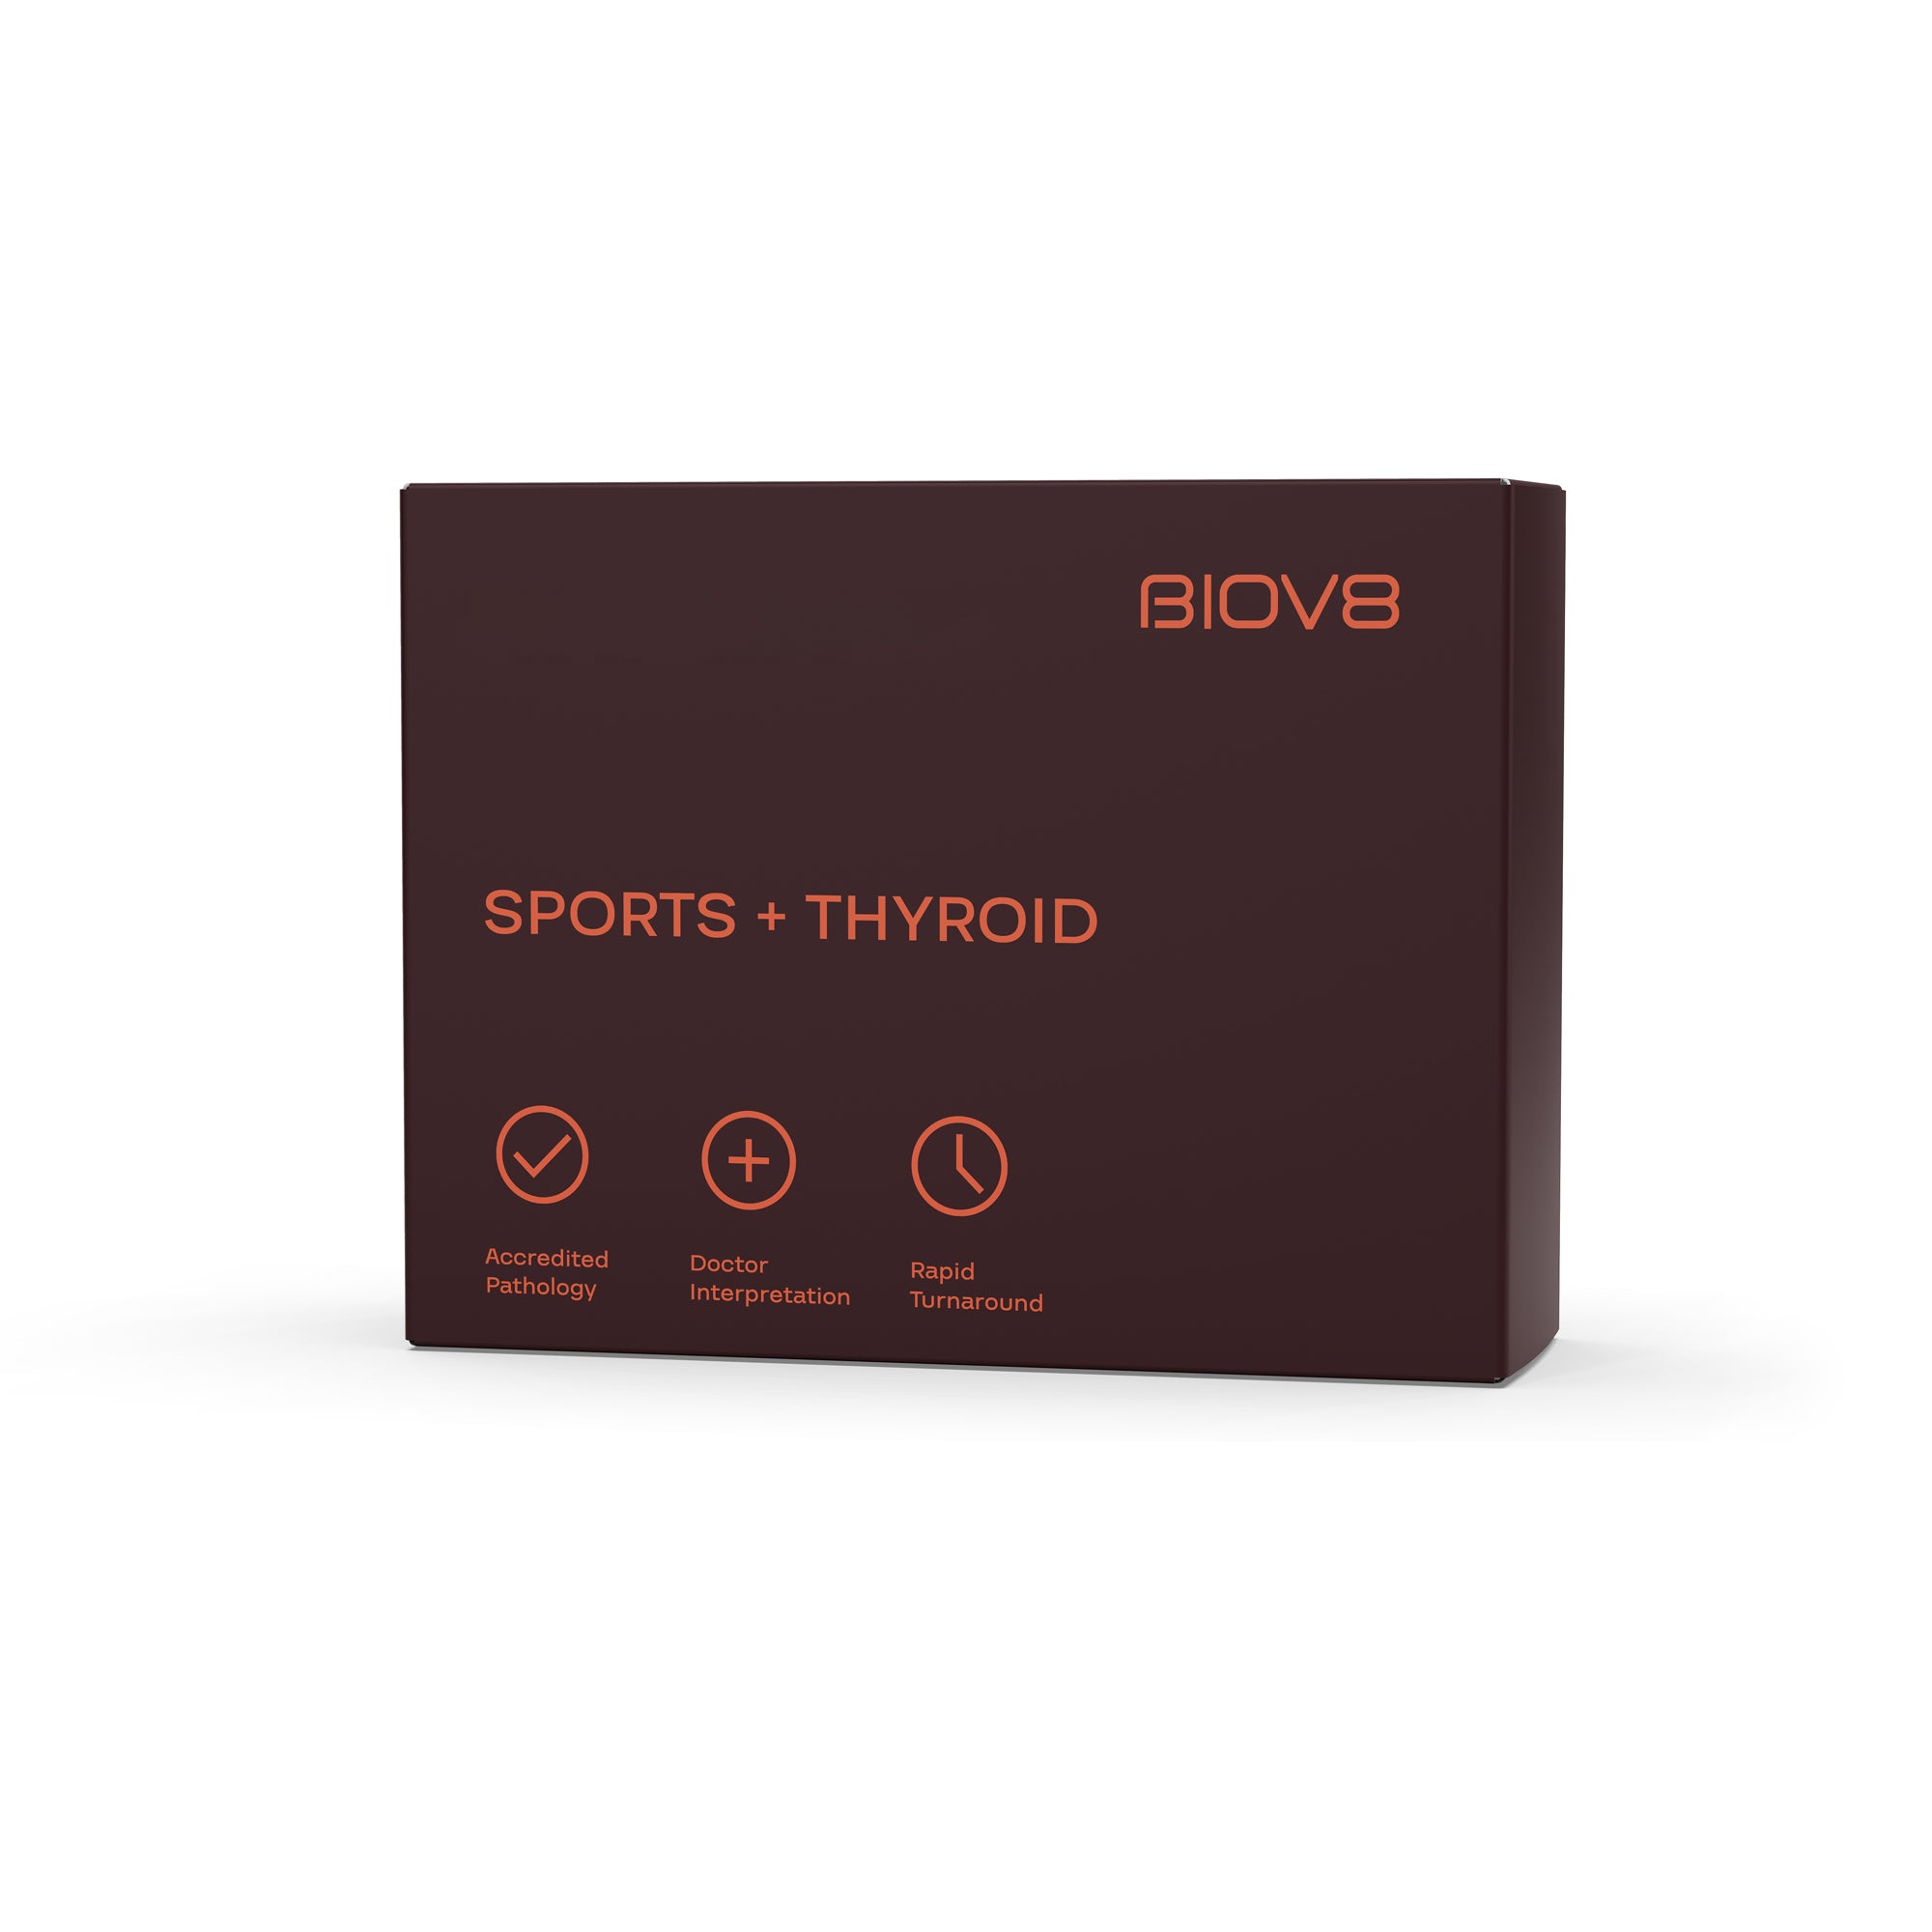 Biov8's Sports Thyroid Test product for blood work analysis